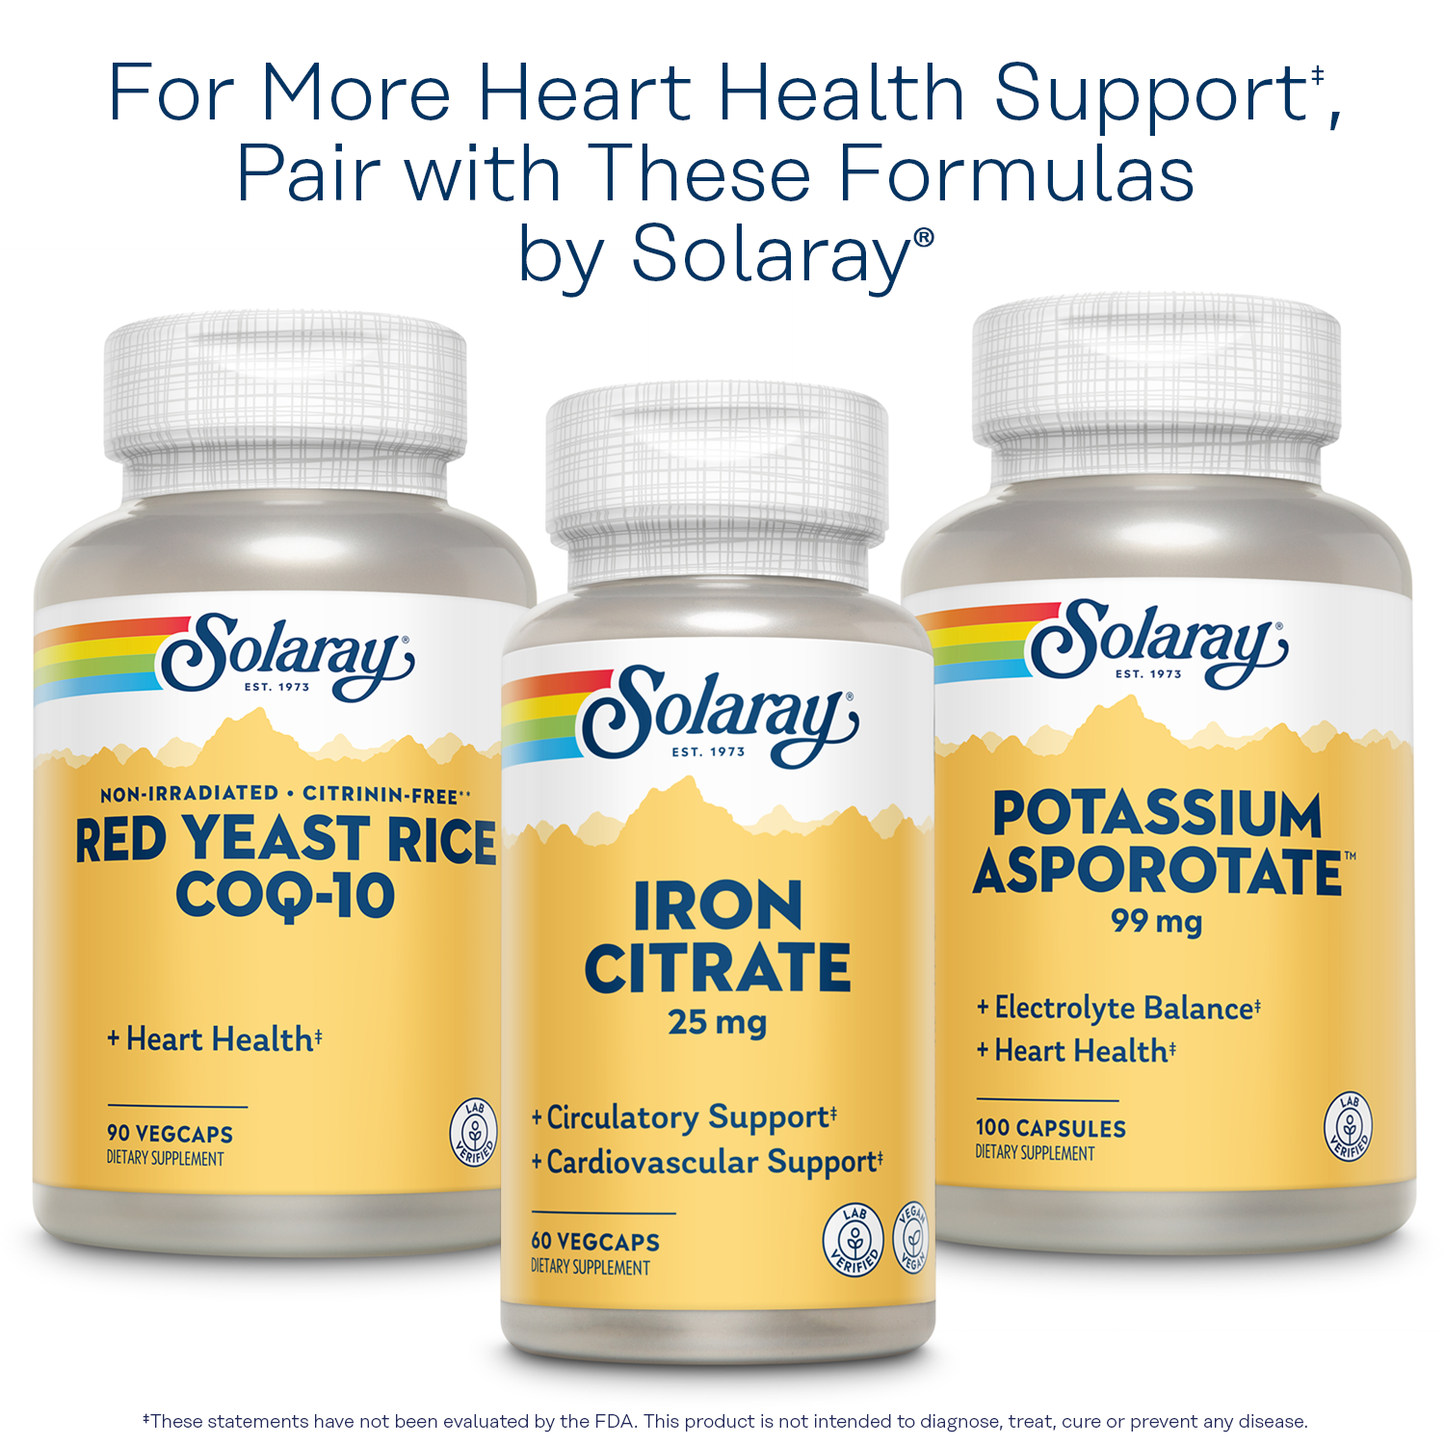 Solaray Hawthorn Berry Capsules 1050 mg, Hawthorne Supplement for Cardiovascular Function & Circulation Support, 60 Day Money-Back Guarantee, Whole Berry, Vegan, 50 Servings, 100 VegCaps